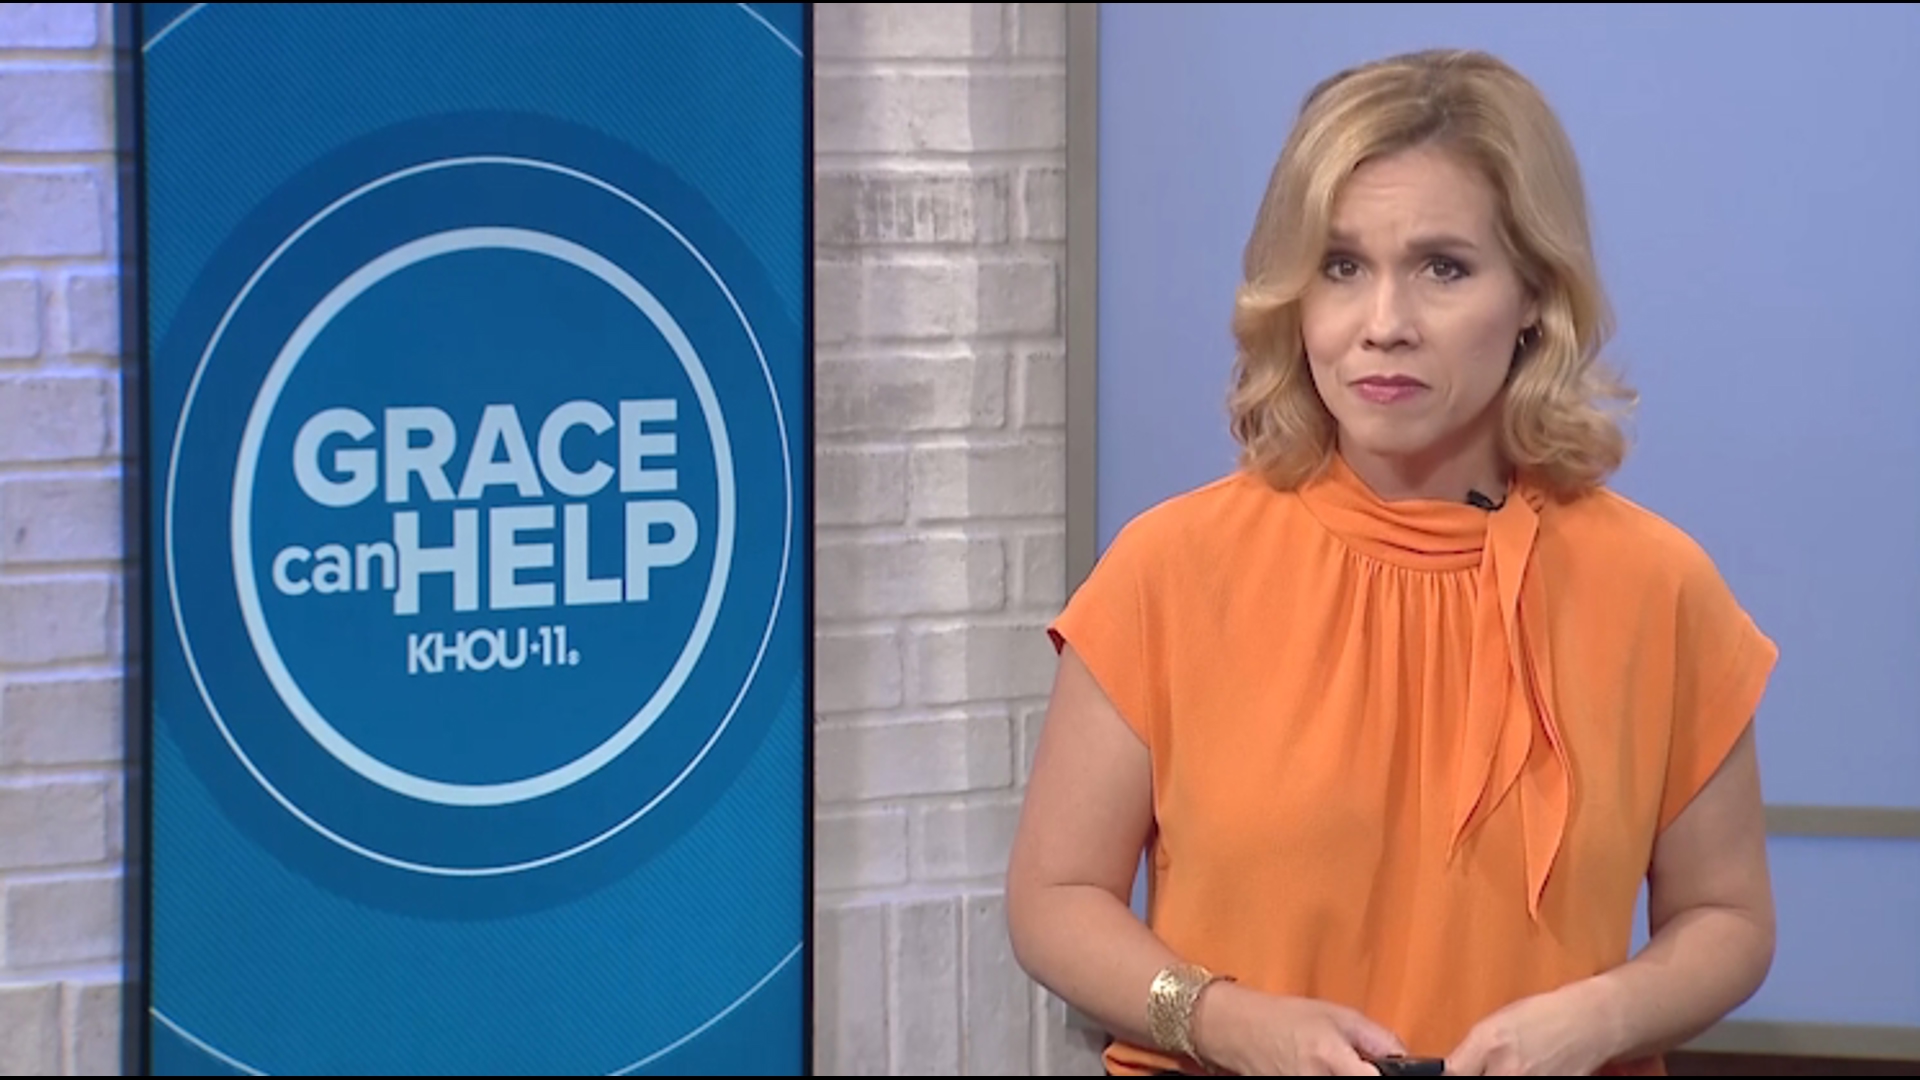 If you've been affected by the storm, Grace White can help.